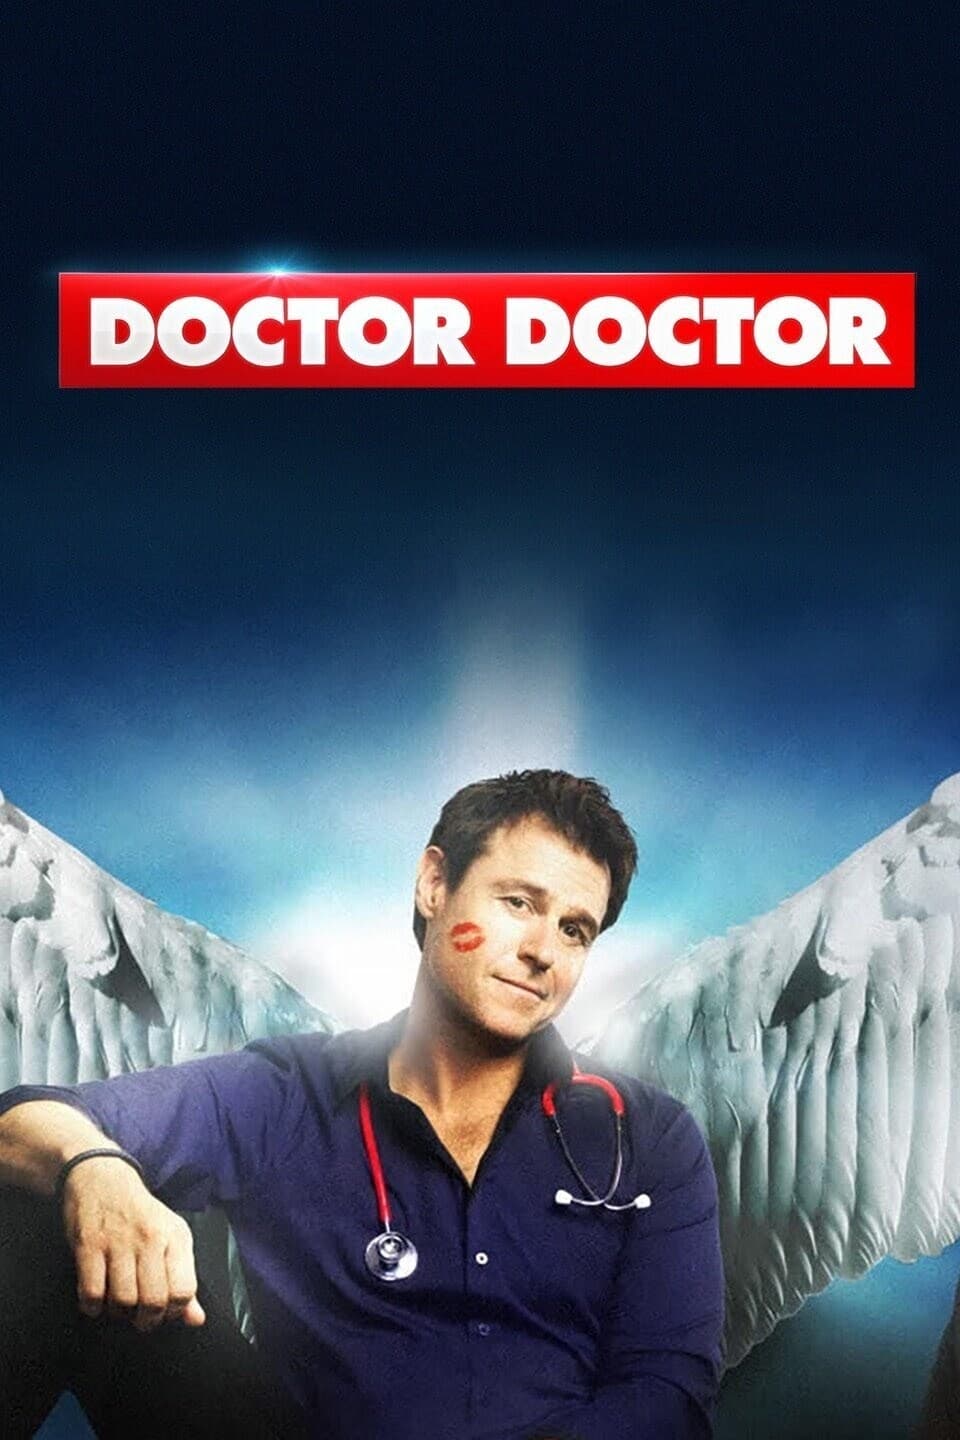 Doctor Doctor TV Shows About Hometown